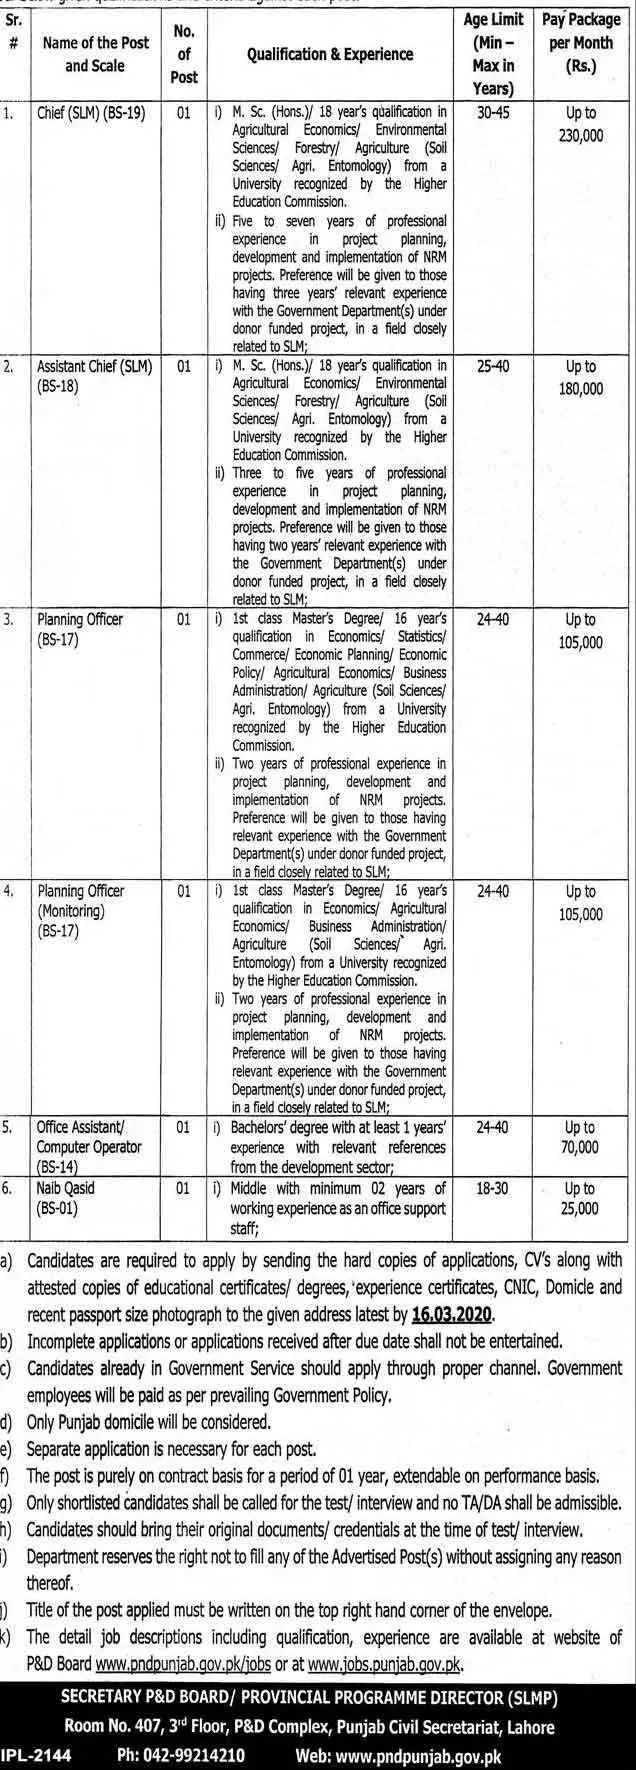 punjab-government-Jobs-2020-Salary-Package